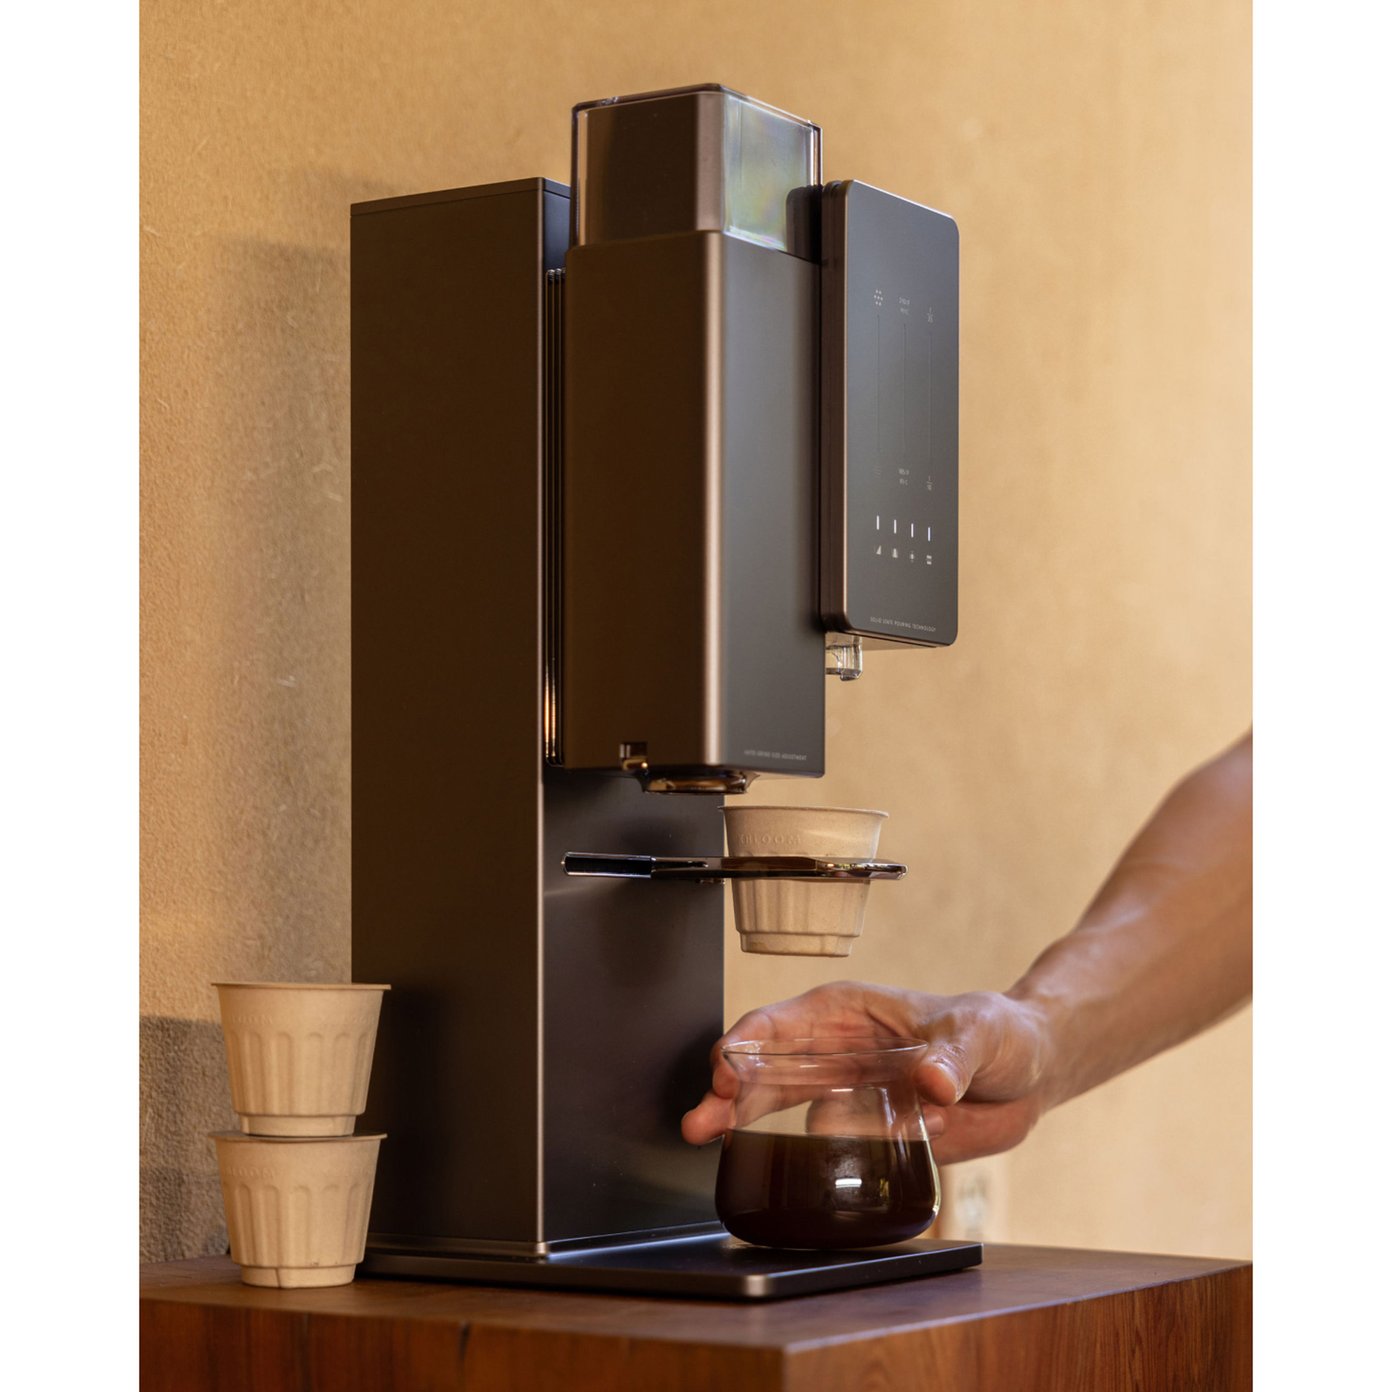 xBloom Fully Automatic Bean-to-Cup Smart Coffee Maker with Built in Grinder, Stainless Steel